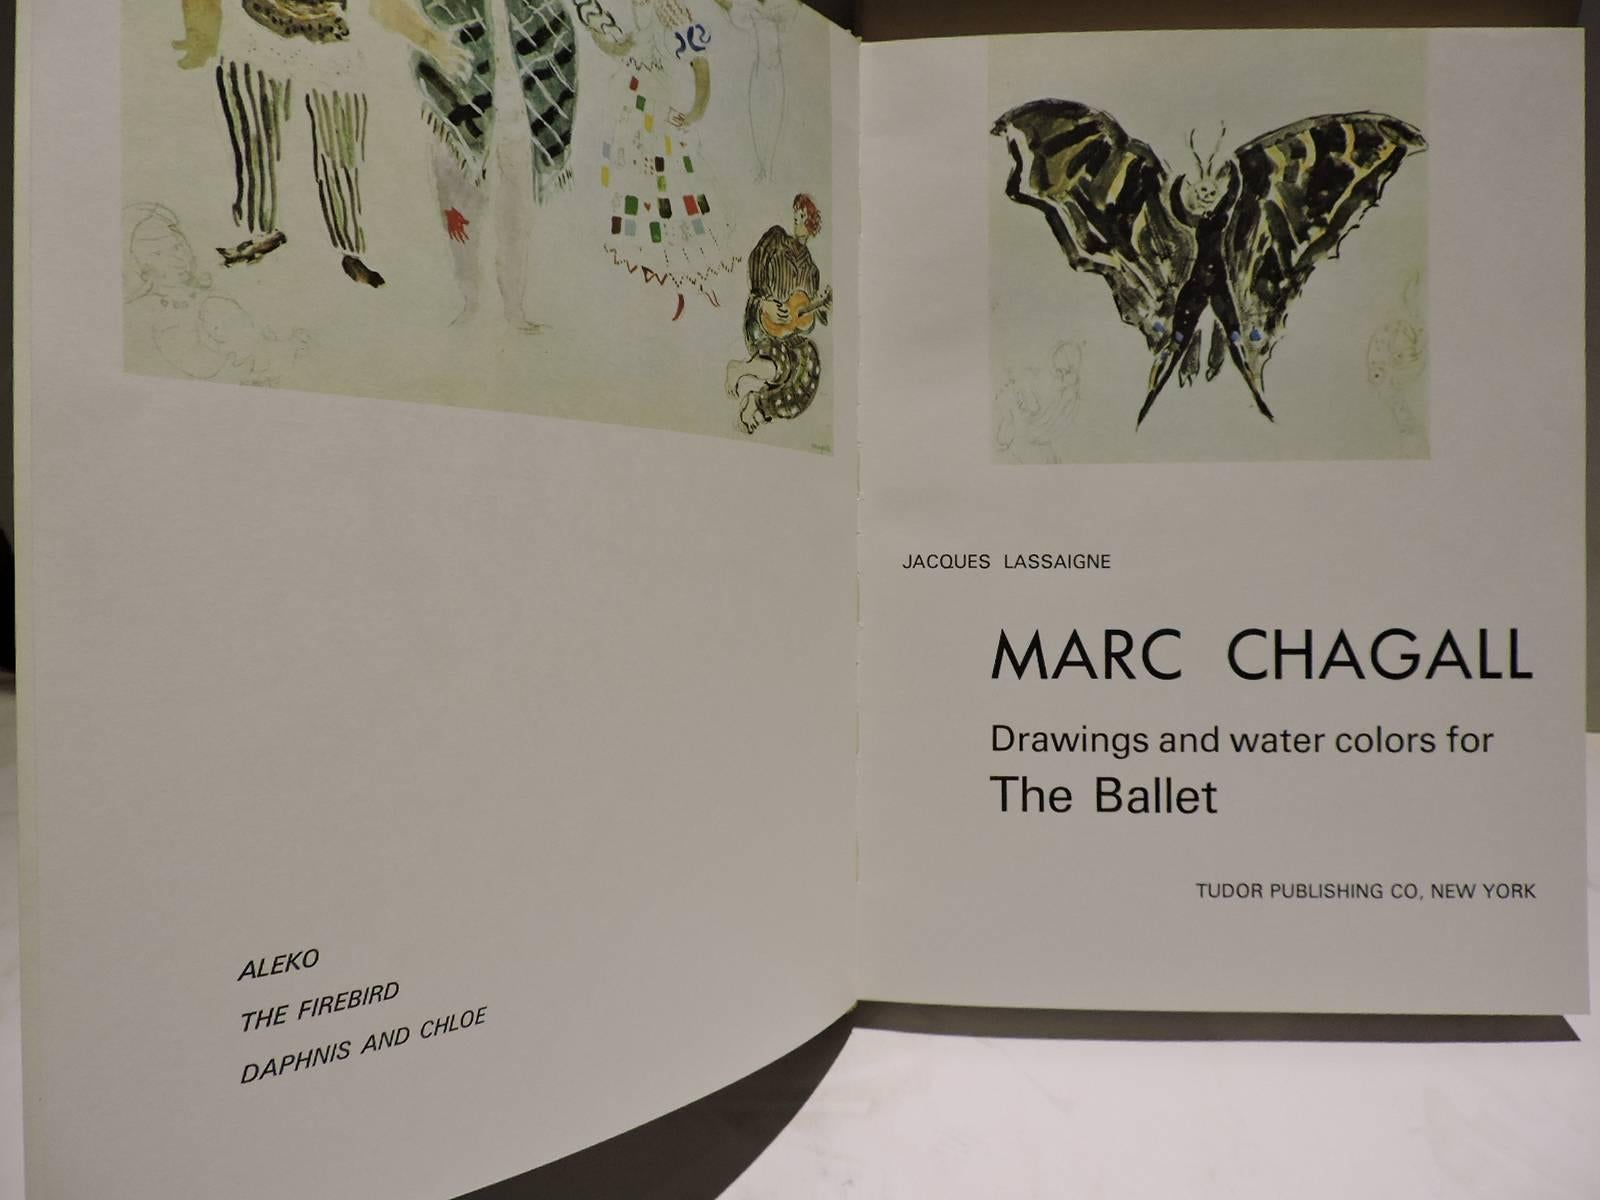 Marc Chagall - Images for the Ballet - 1st edition - Tudor Publishing Company. NY 1969 - printed in France -  this book was completed in 1969 - color plates printed by Mourlot Freres - the text by L'imprimerie Union. Sixty eight reproductions in